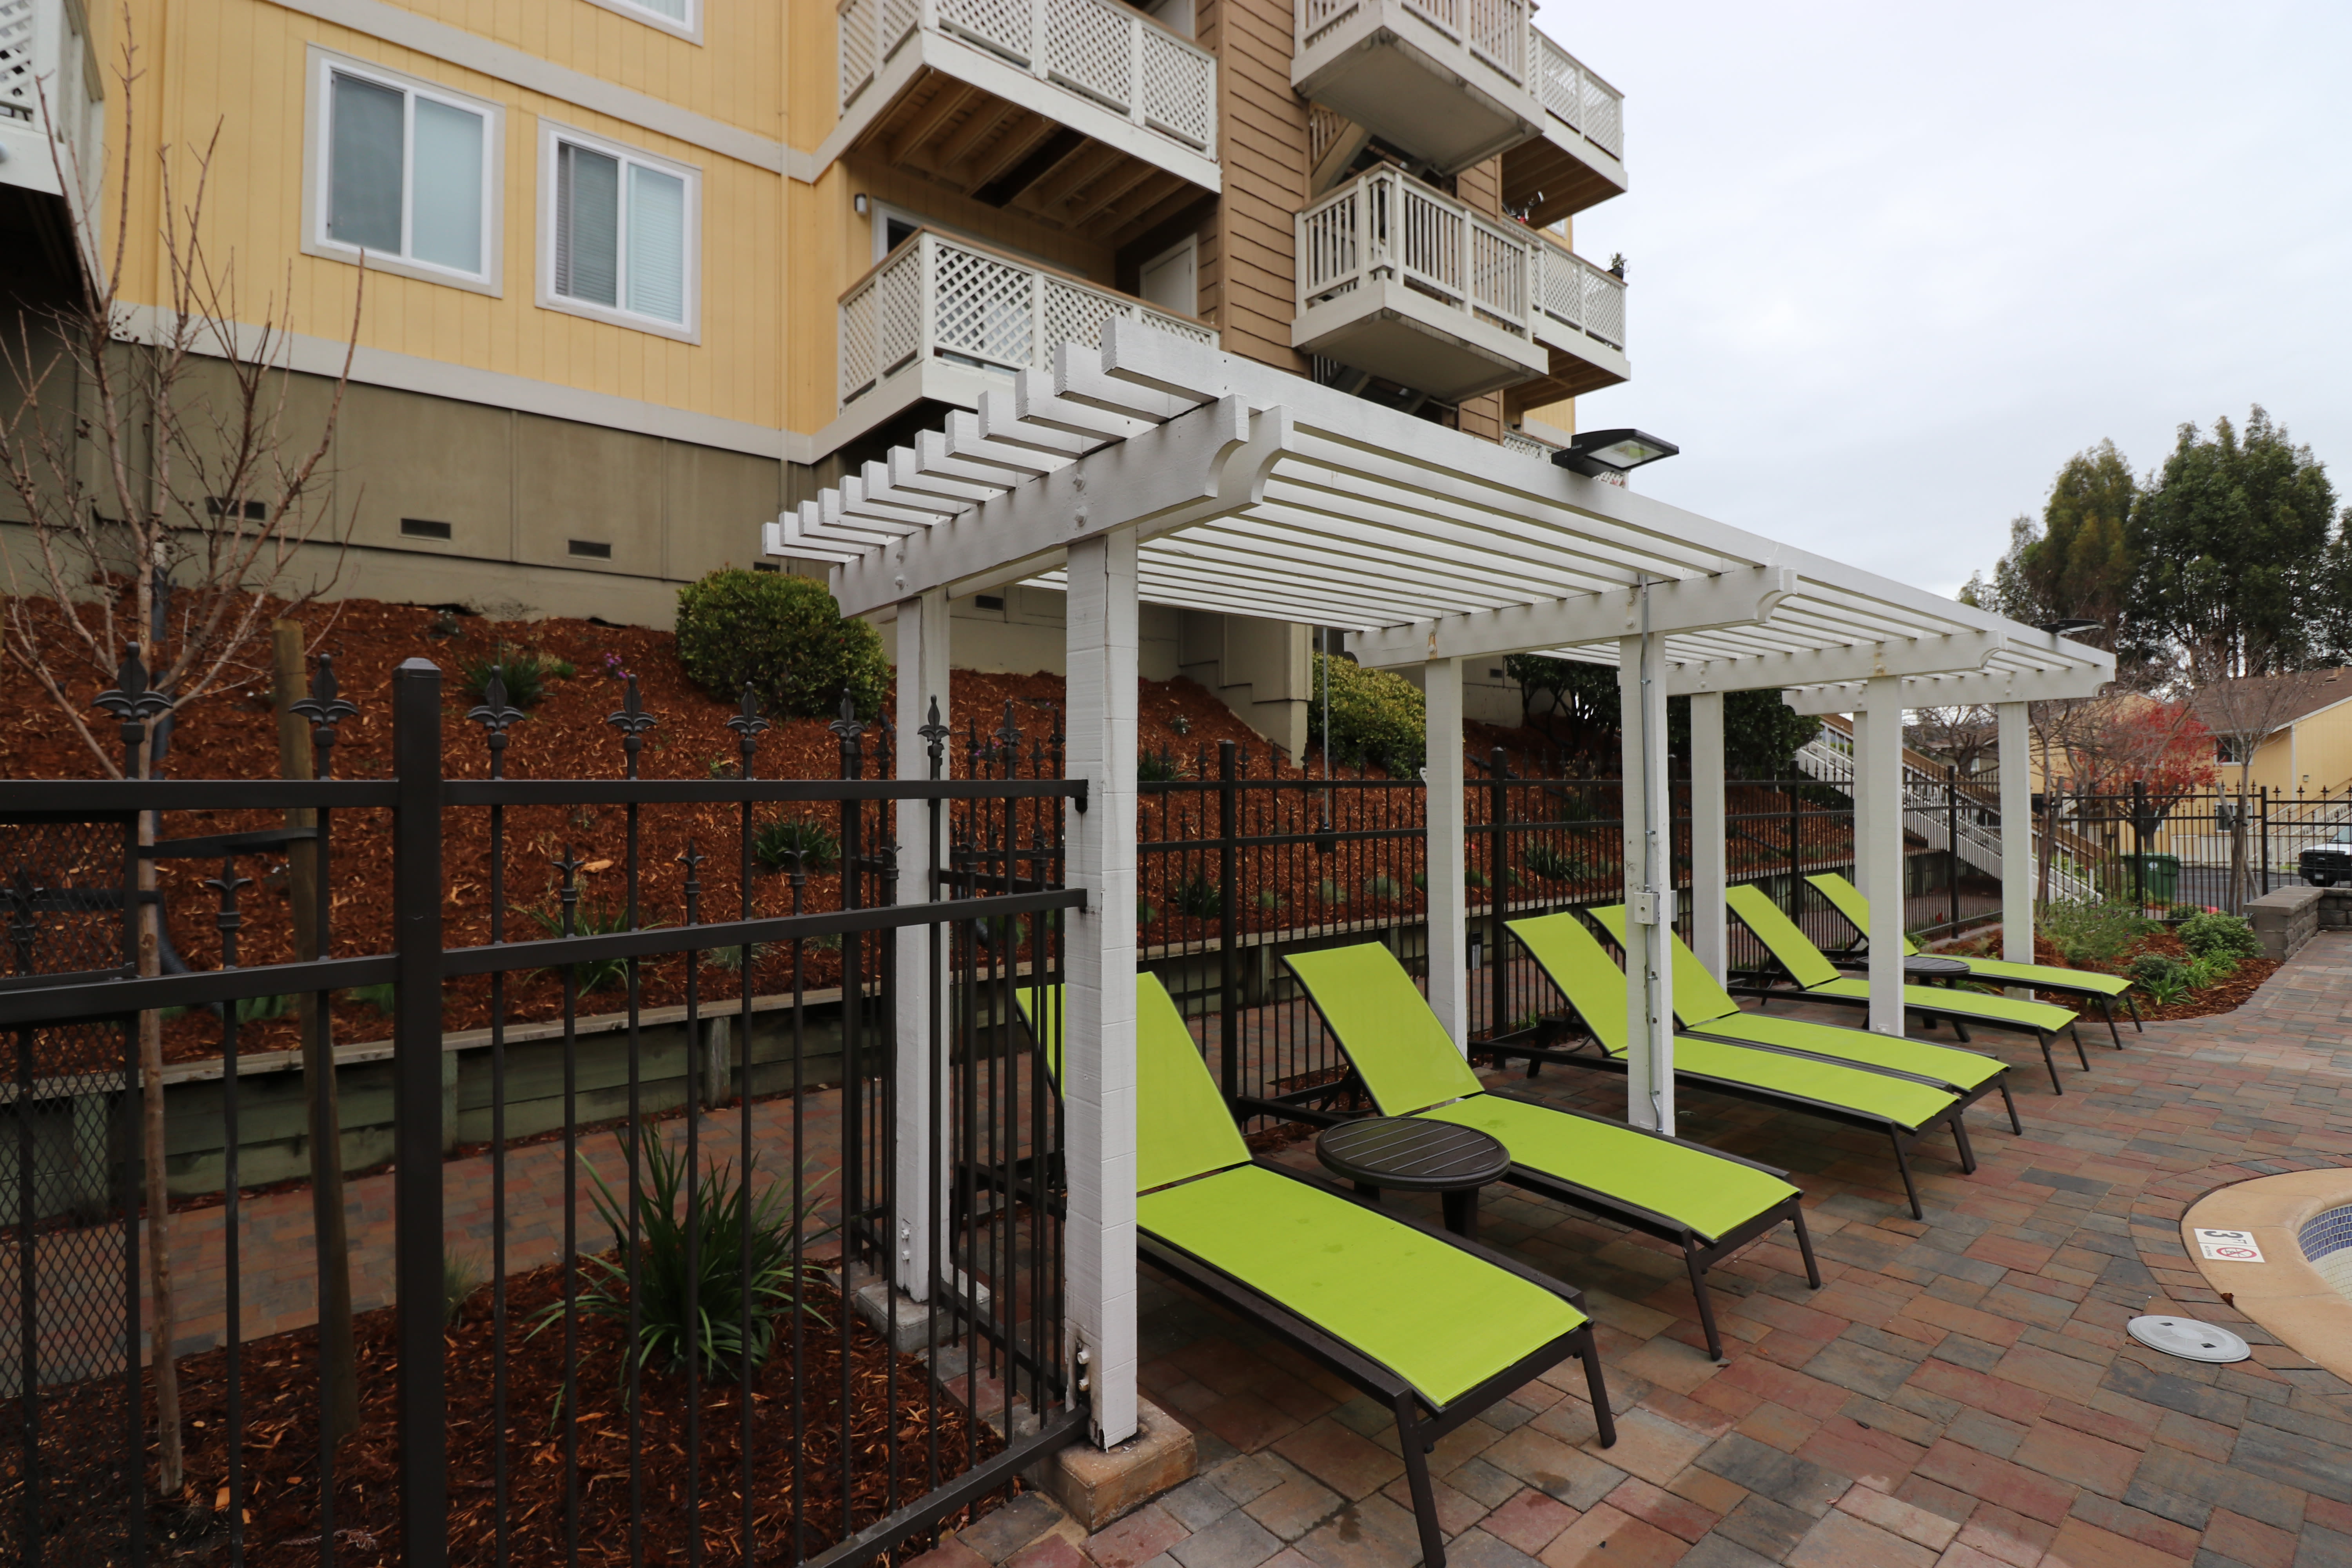 Chaise lounge chairs by the pool at Quail Hill Apartment Homes in Castro Valley, California